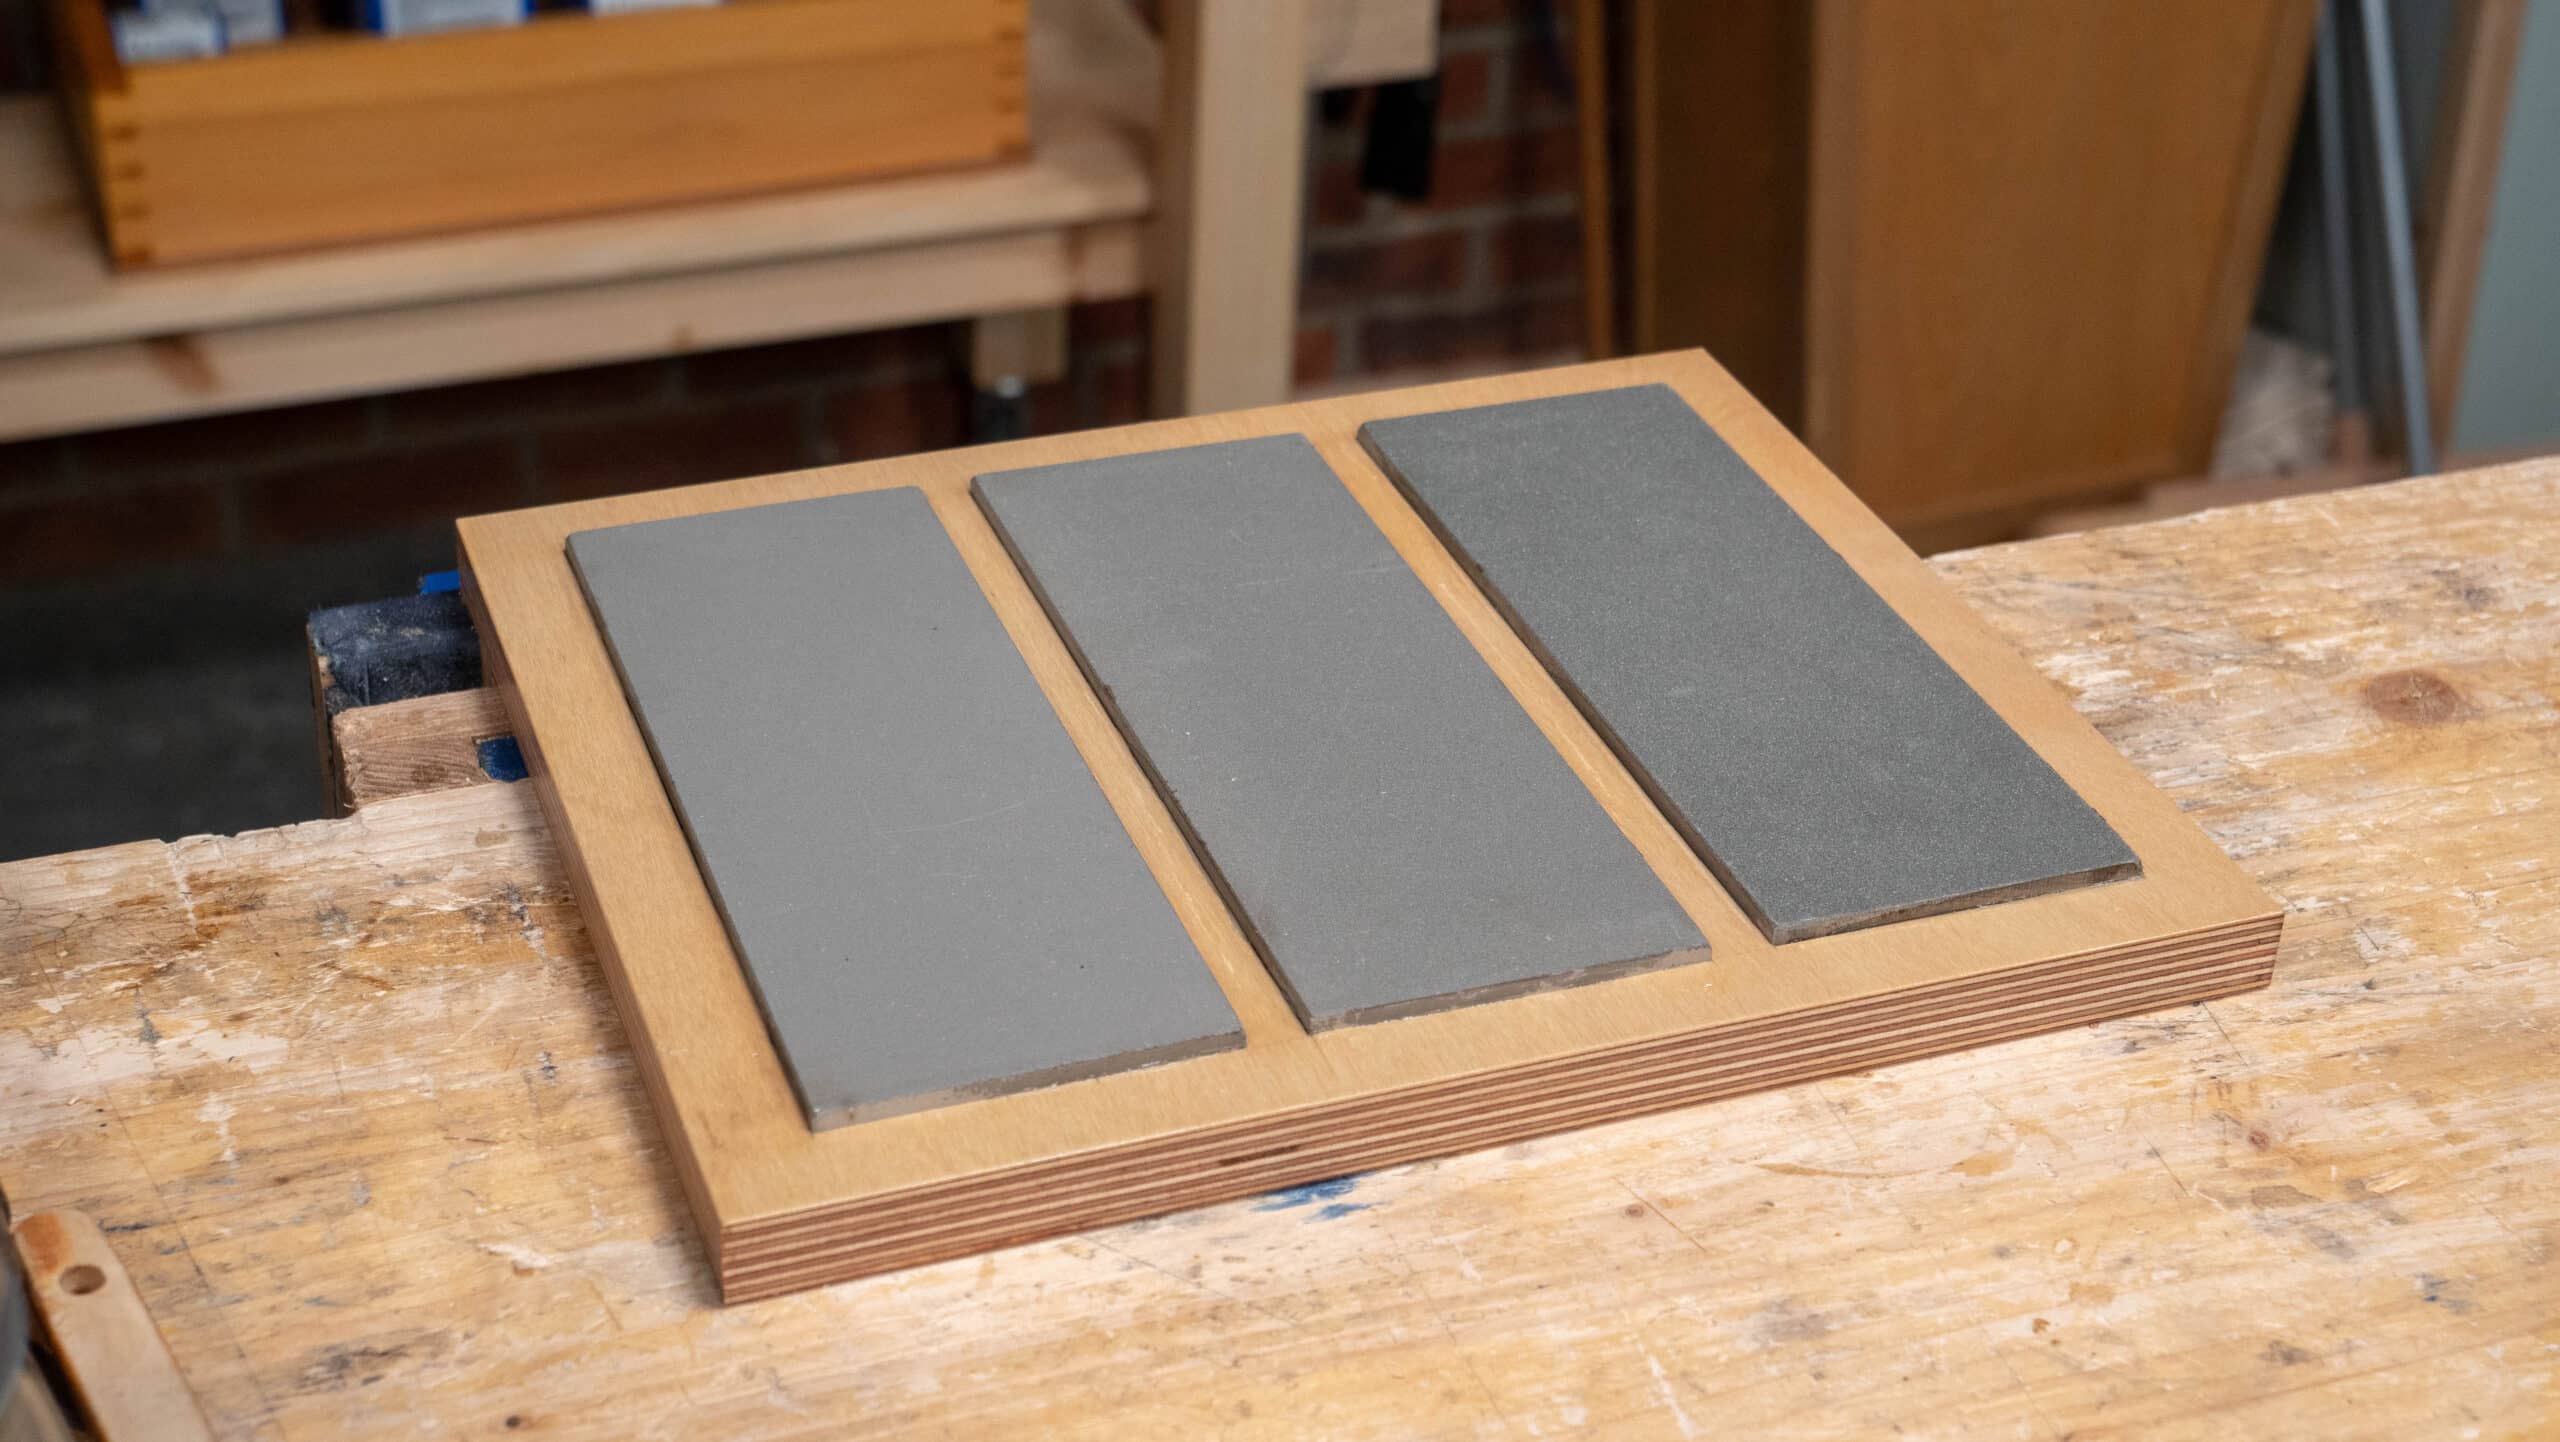 How to Make a Sharpening Stones Holder